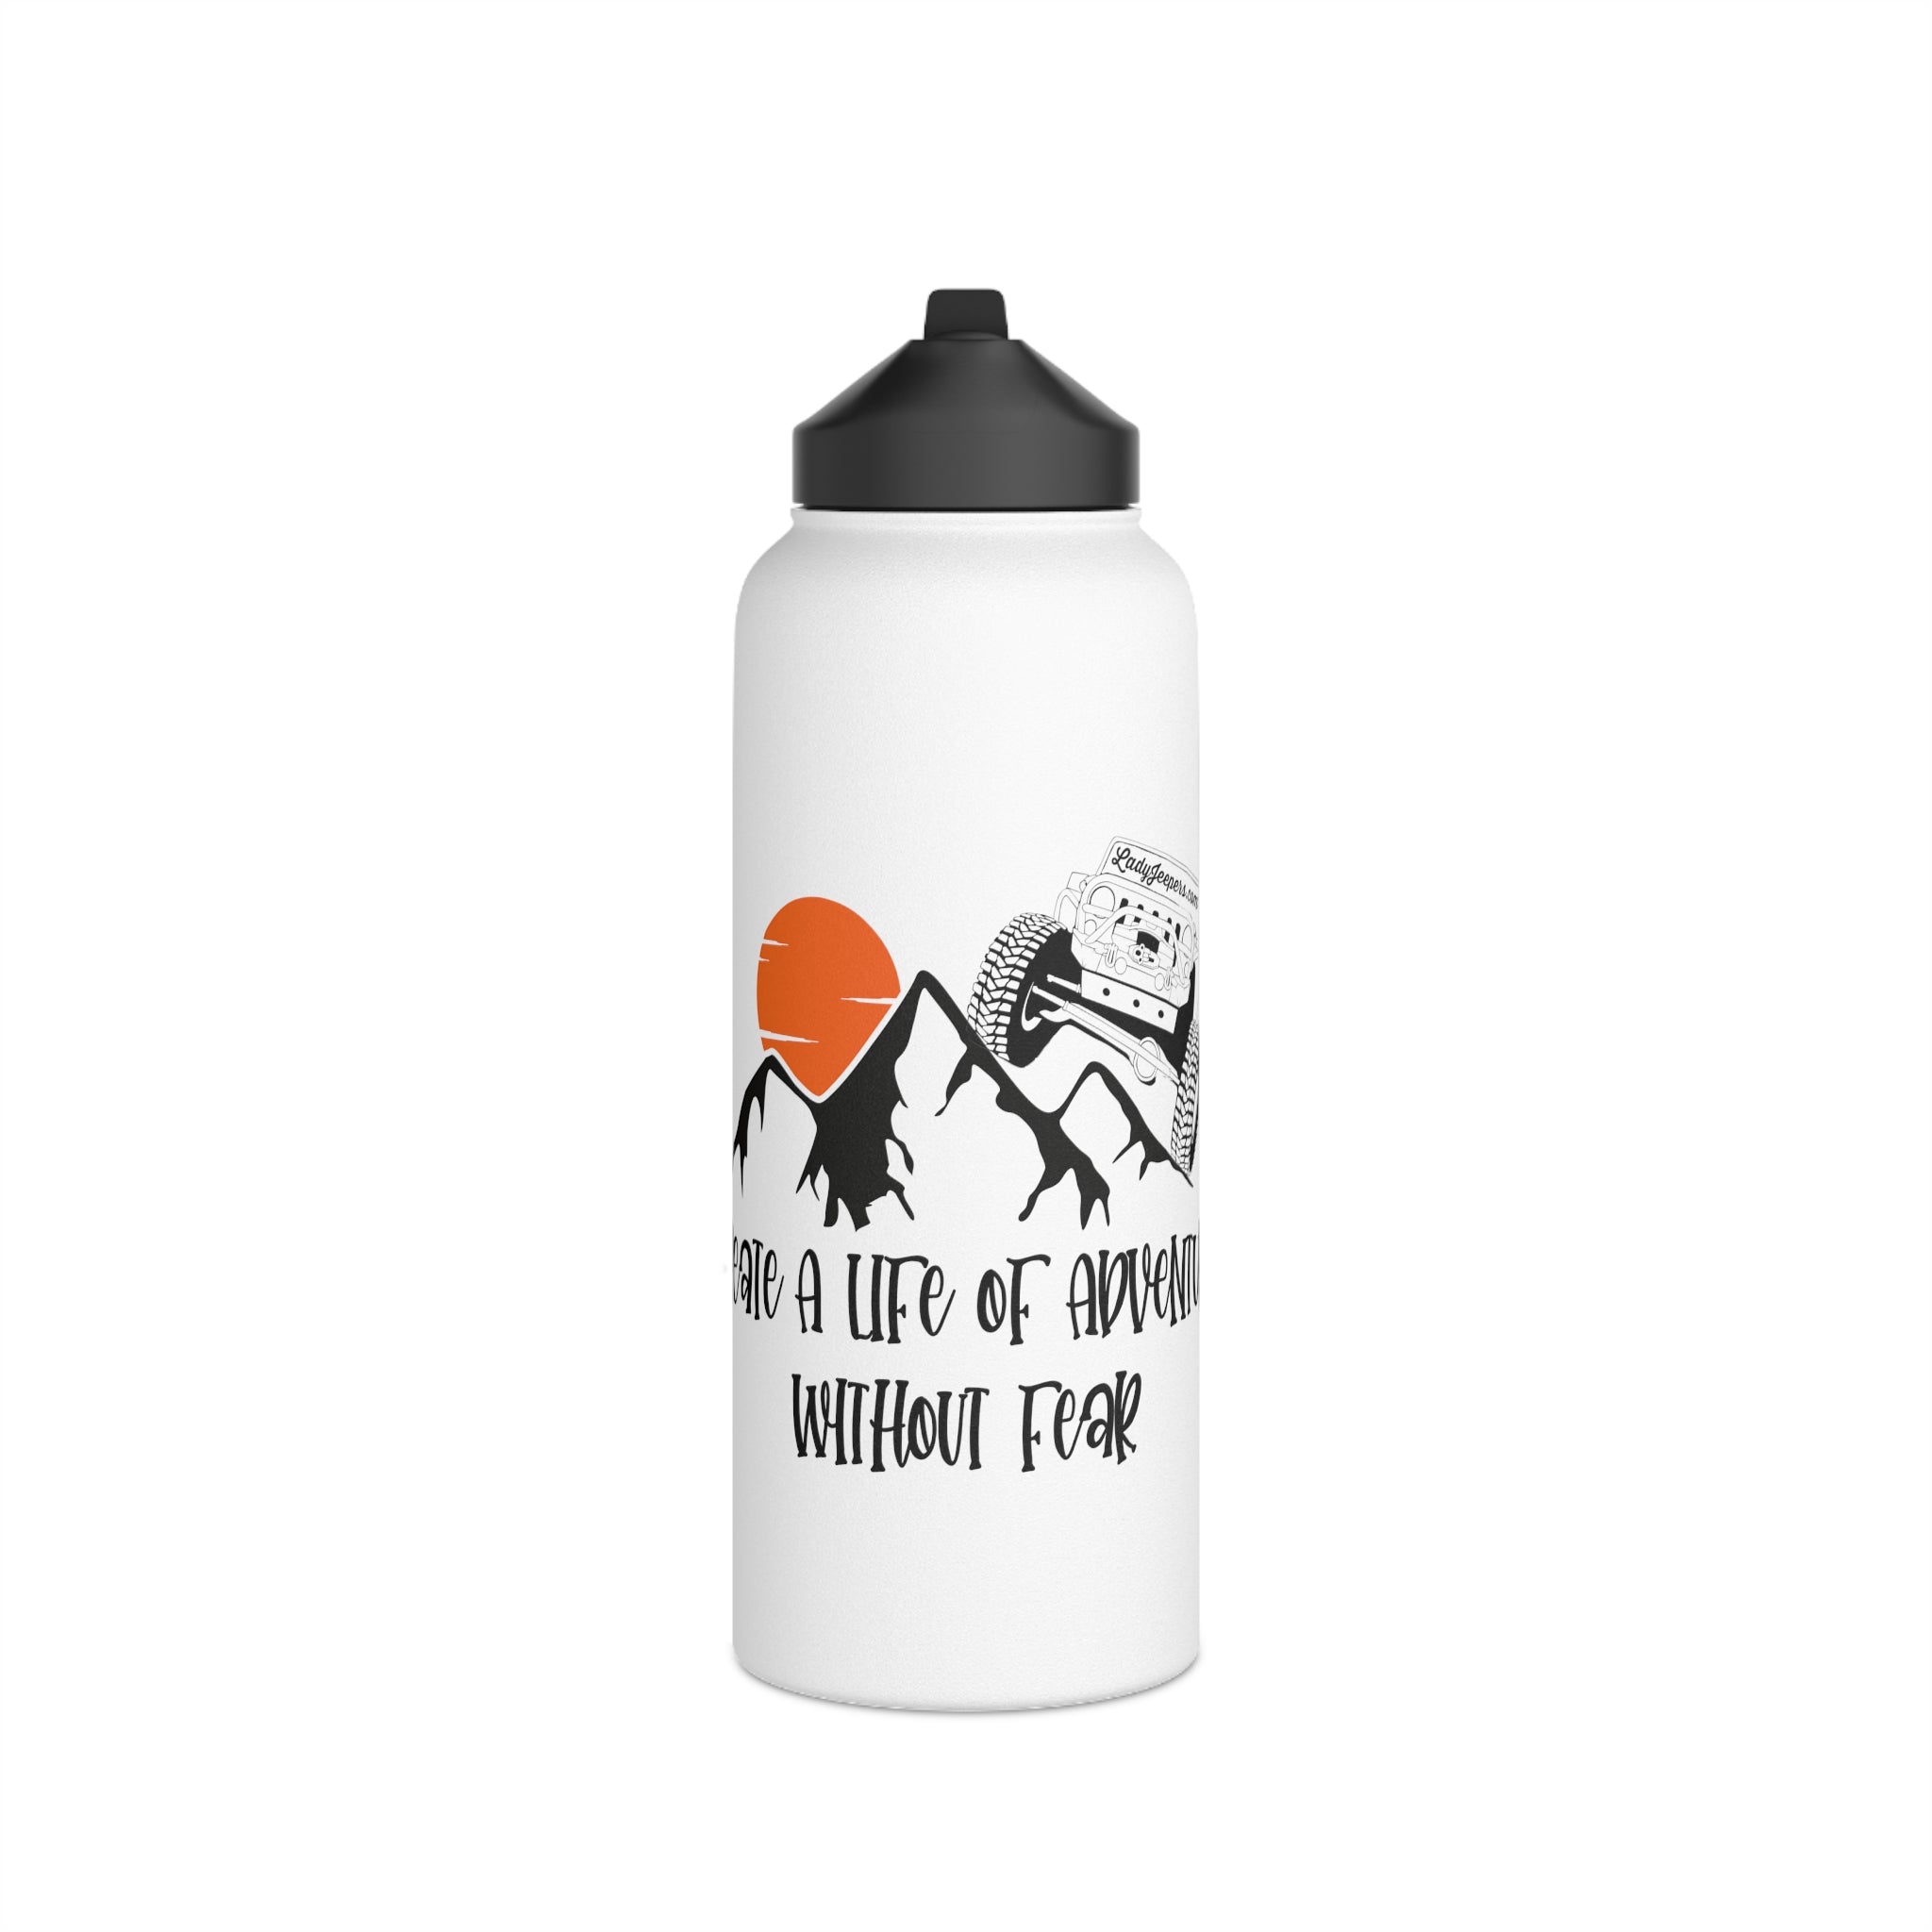 Create A Life Of Adventure Without Fear Stainless Steel Water Bottle